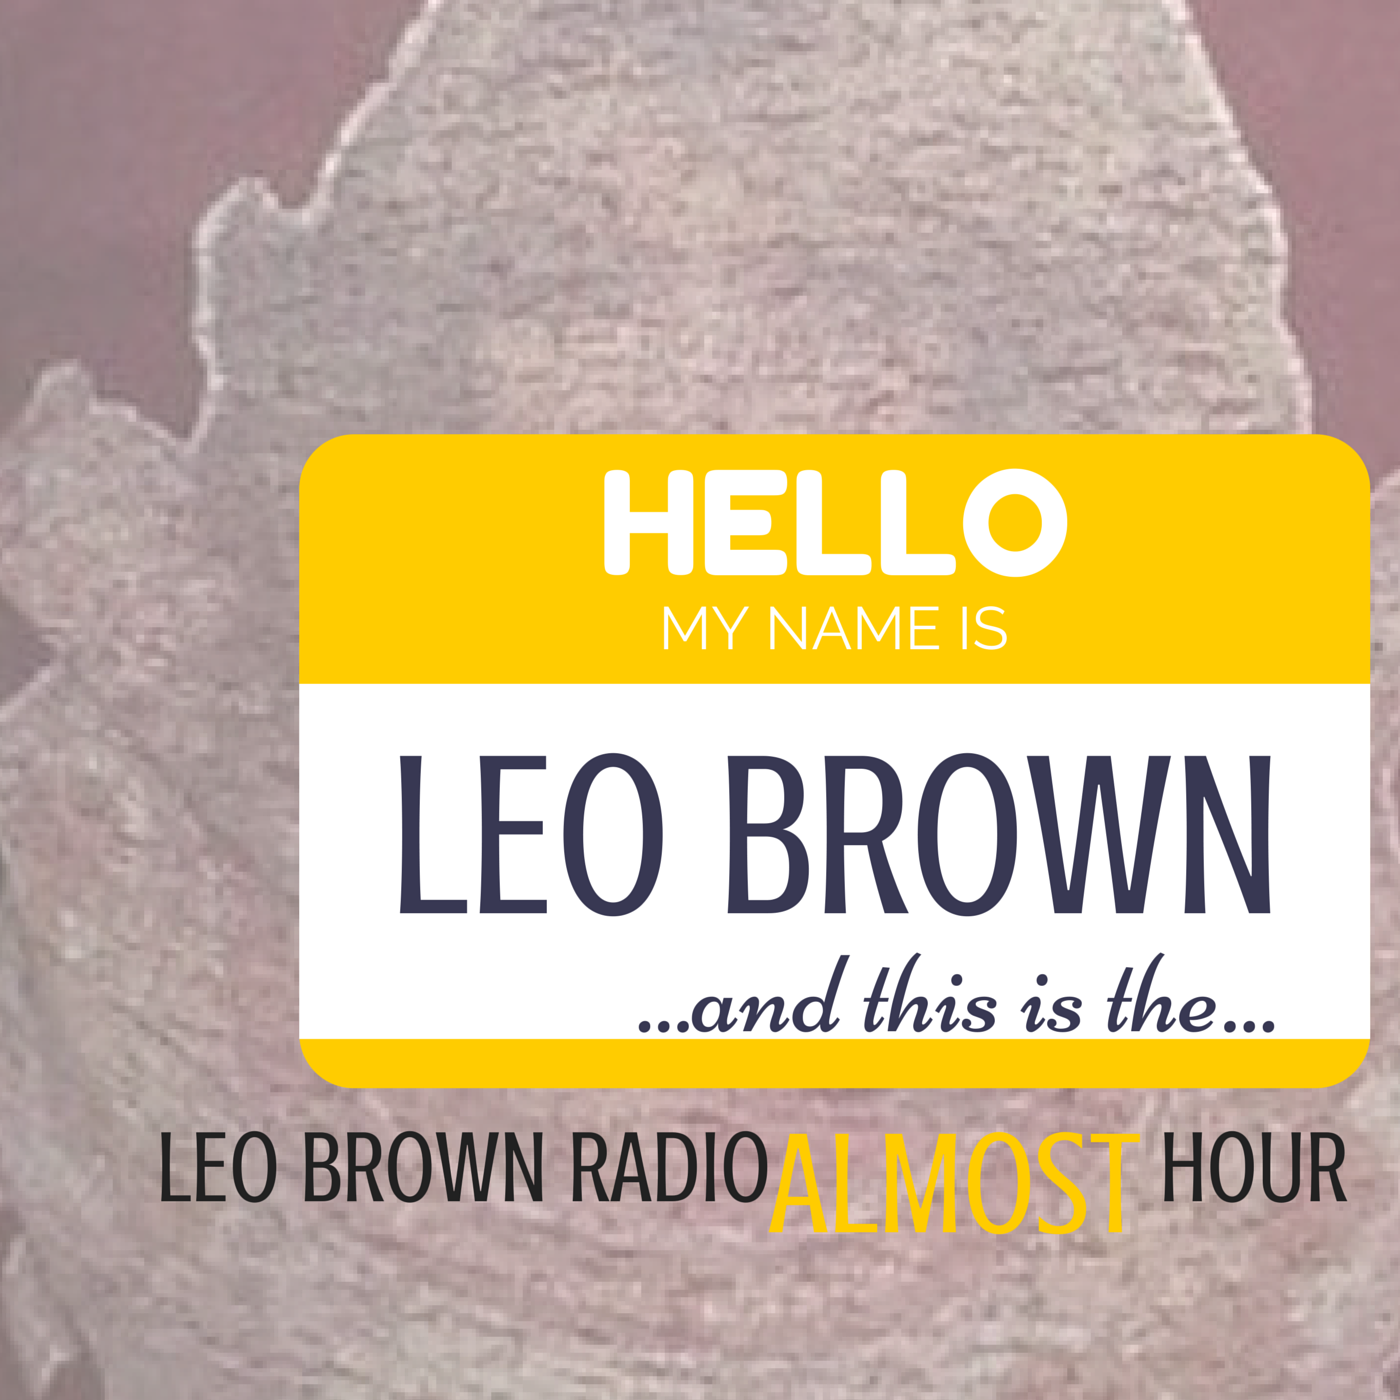 Leo Brown Almost Hour 4/11/17